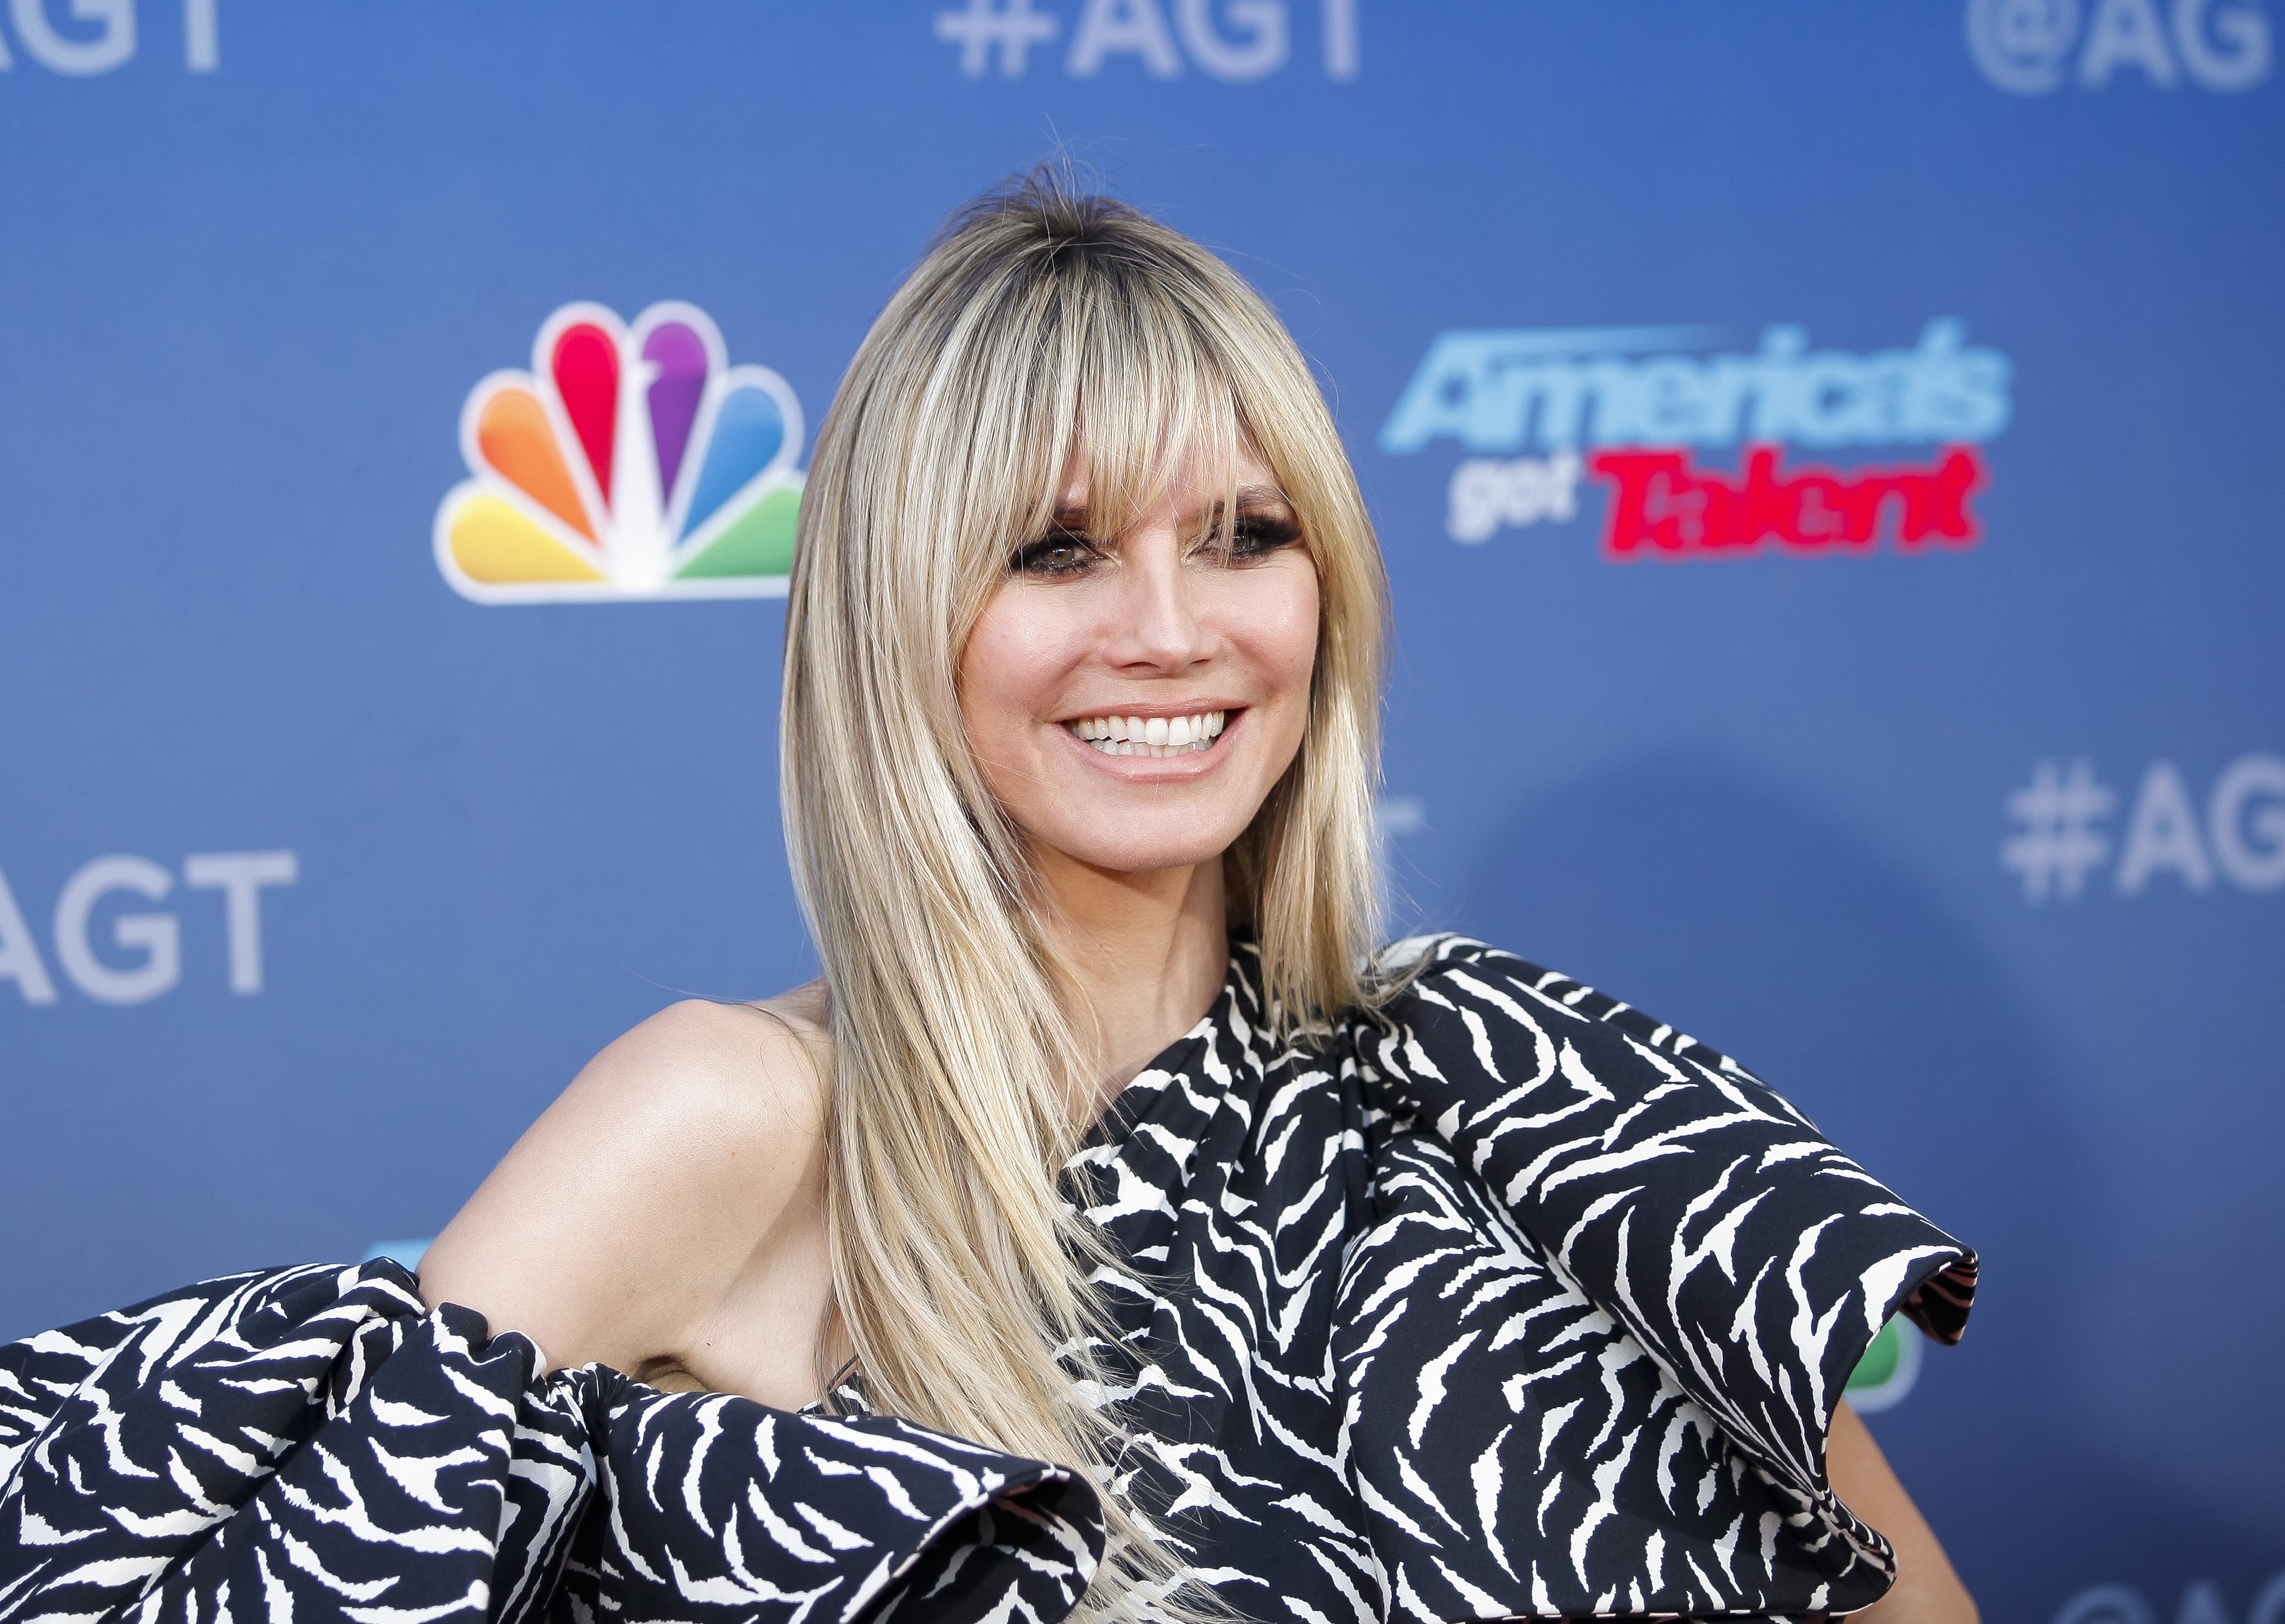 Heidi Klum attends the season 15 of "America's Got Talent" in Pasadena, California on March 4, 2020. | Photo: Getty Images